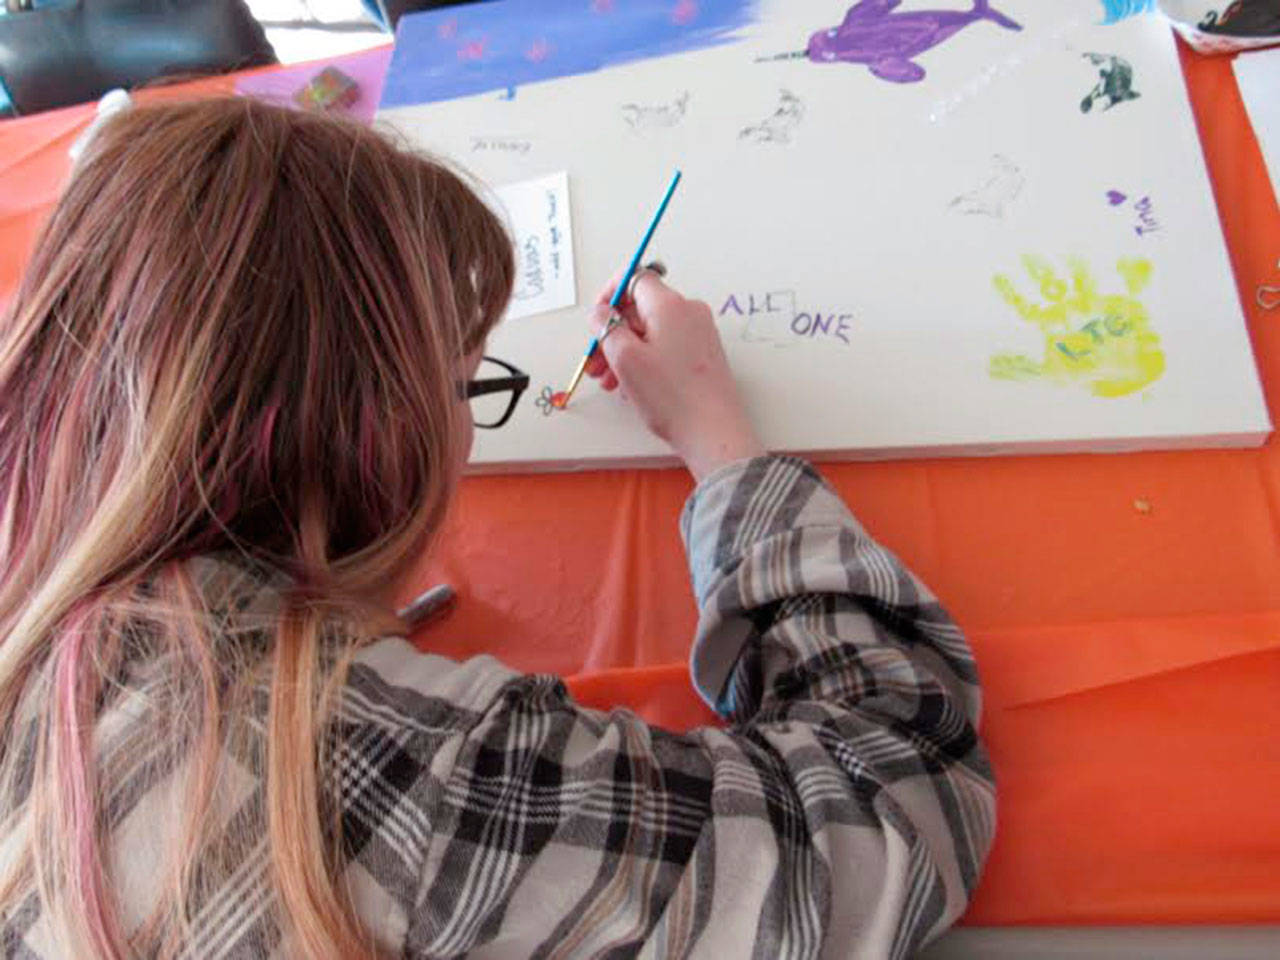 Picnic attendees created a community art canvas. (Photos provided)